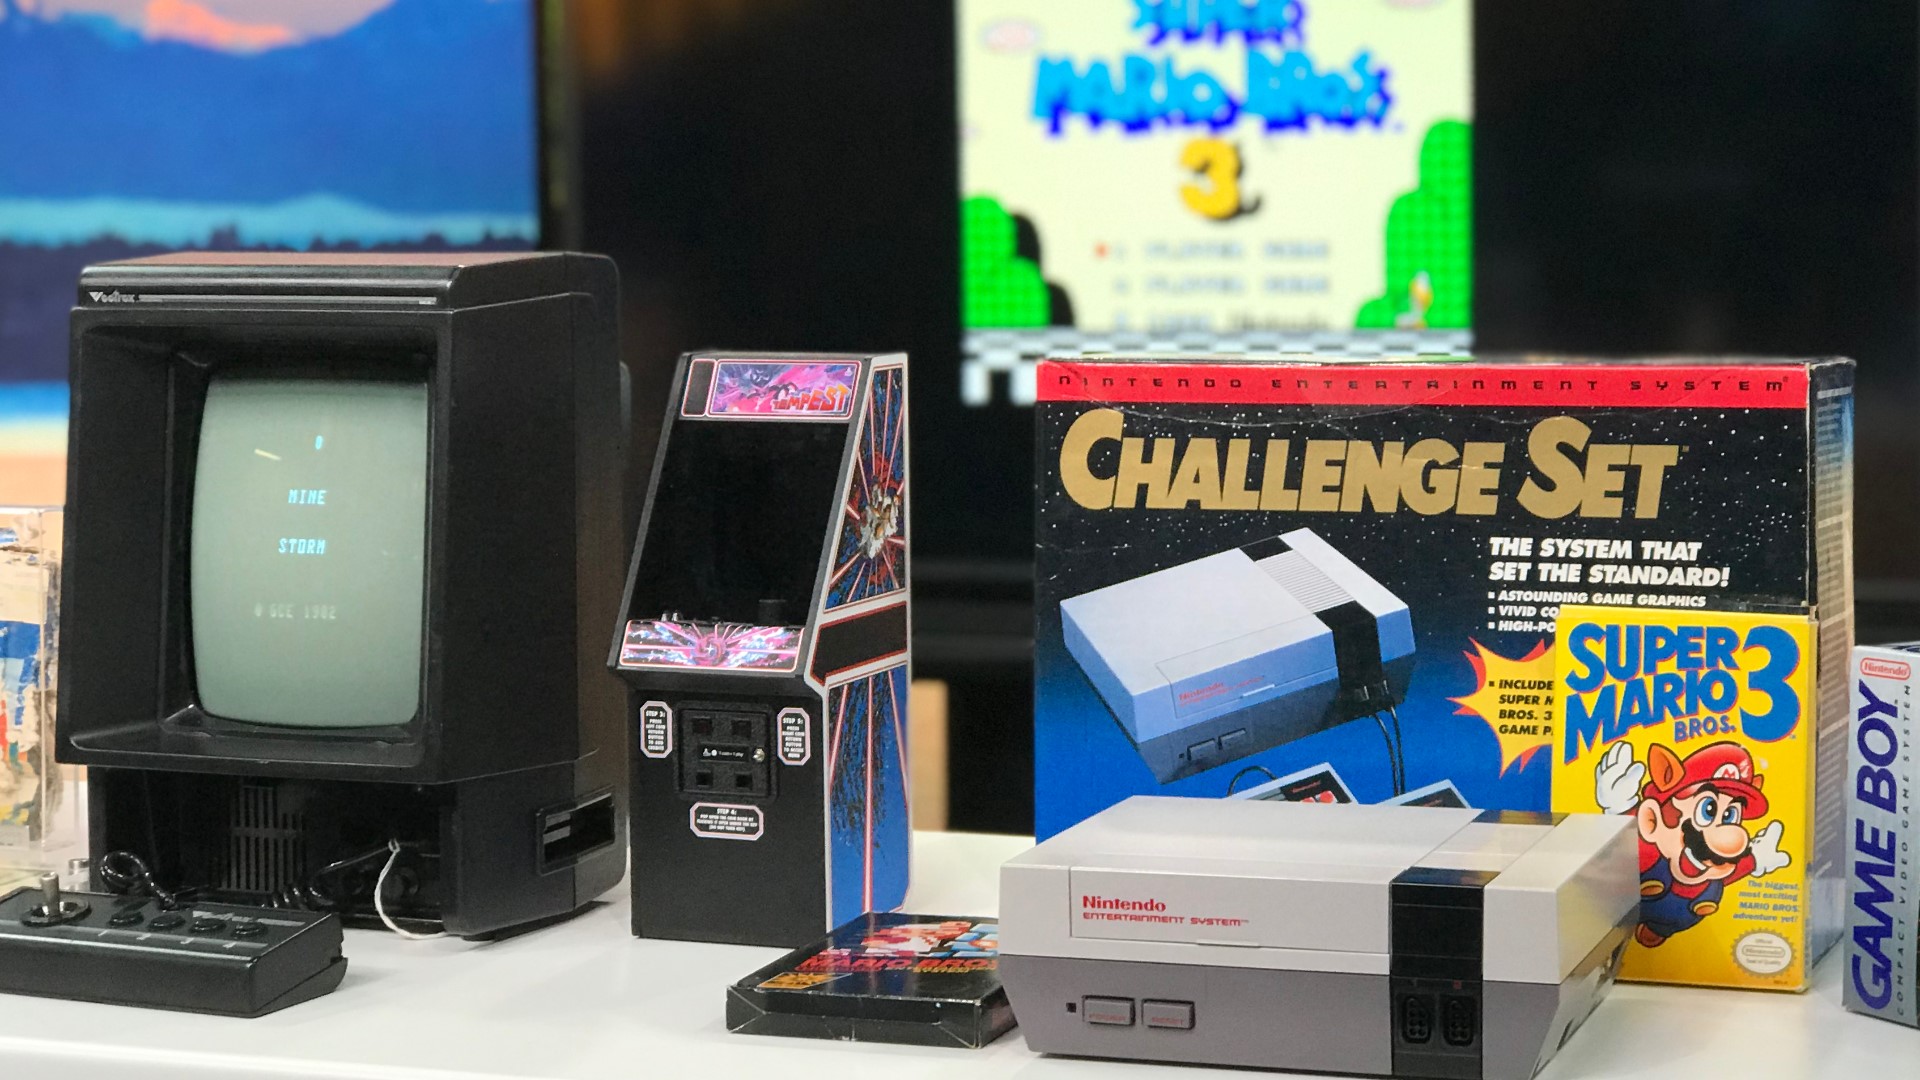 We're celebrating National Video Games Day with the Seattle Retro Gaming Expo, playing on some classic consoles, and talking about the past and future of gaming.